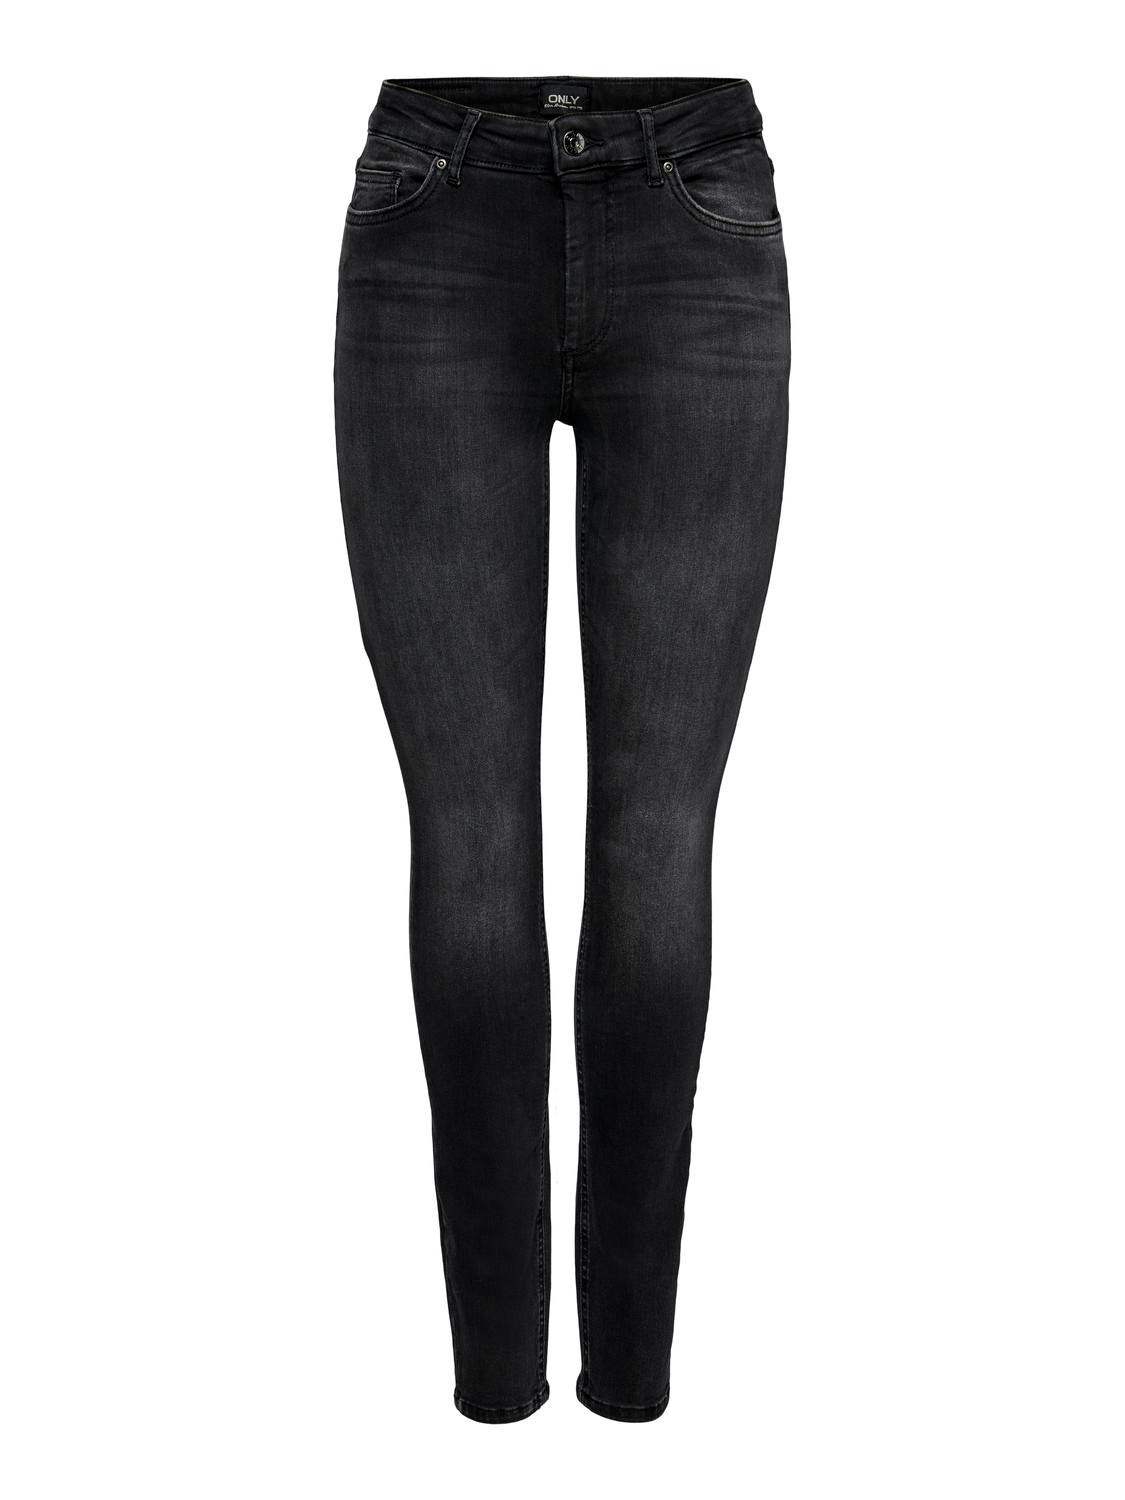 ONLY Skinny Fit Mittlere Taille Jeans -Black Denim - 15225846